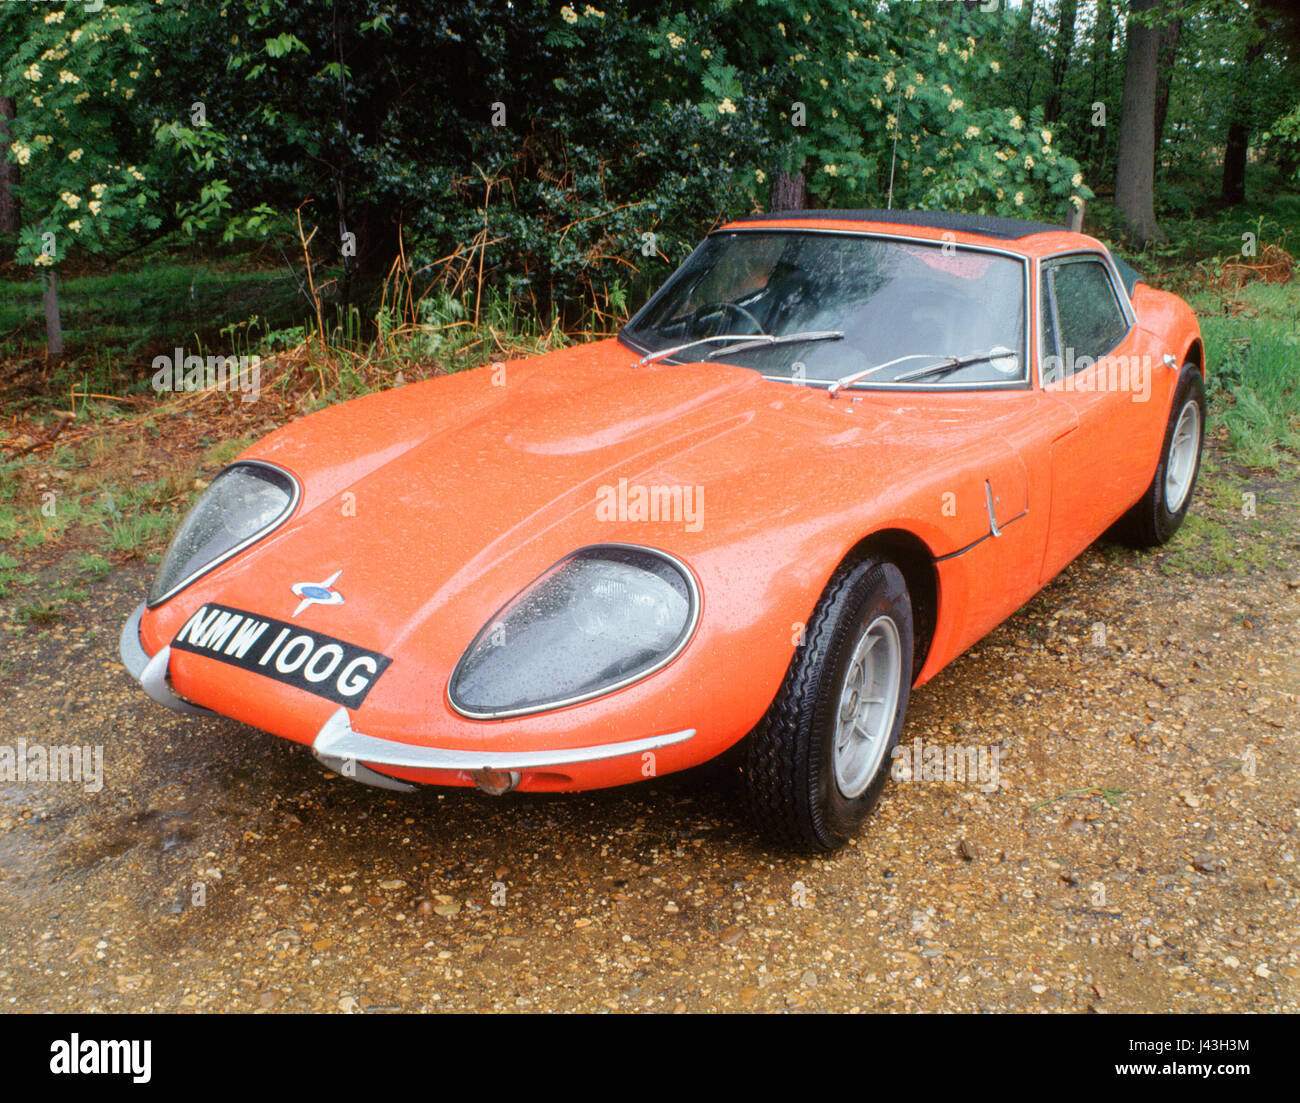 1968 Marcos 3 litre Stock Photo